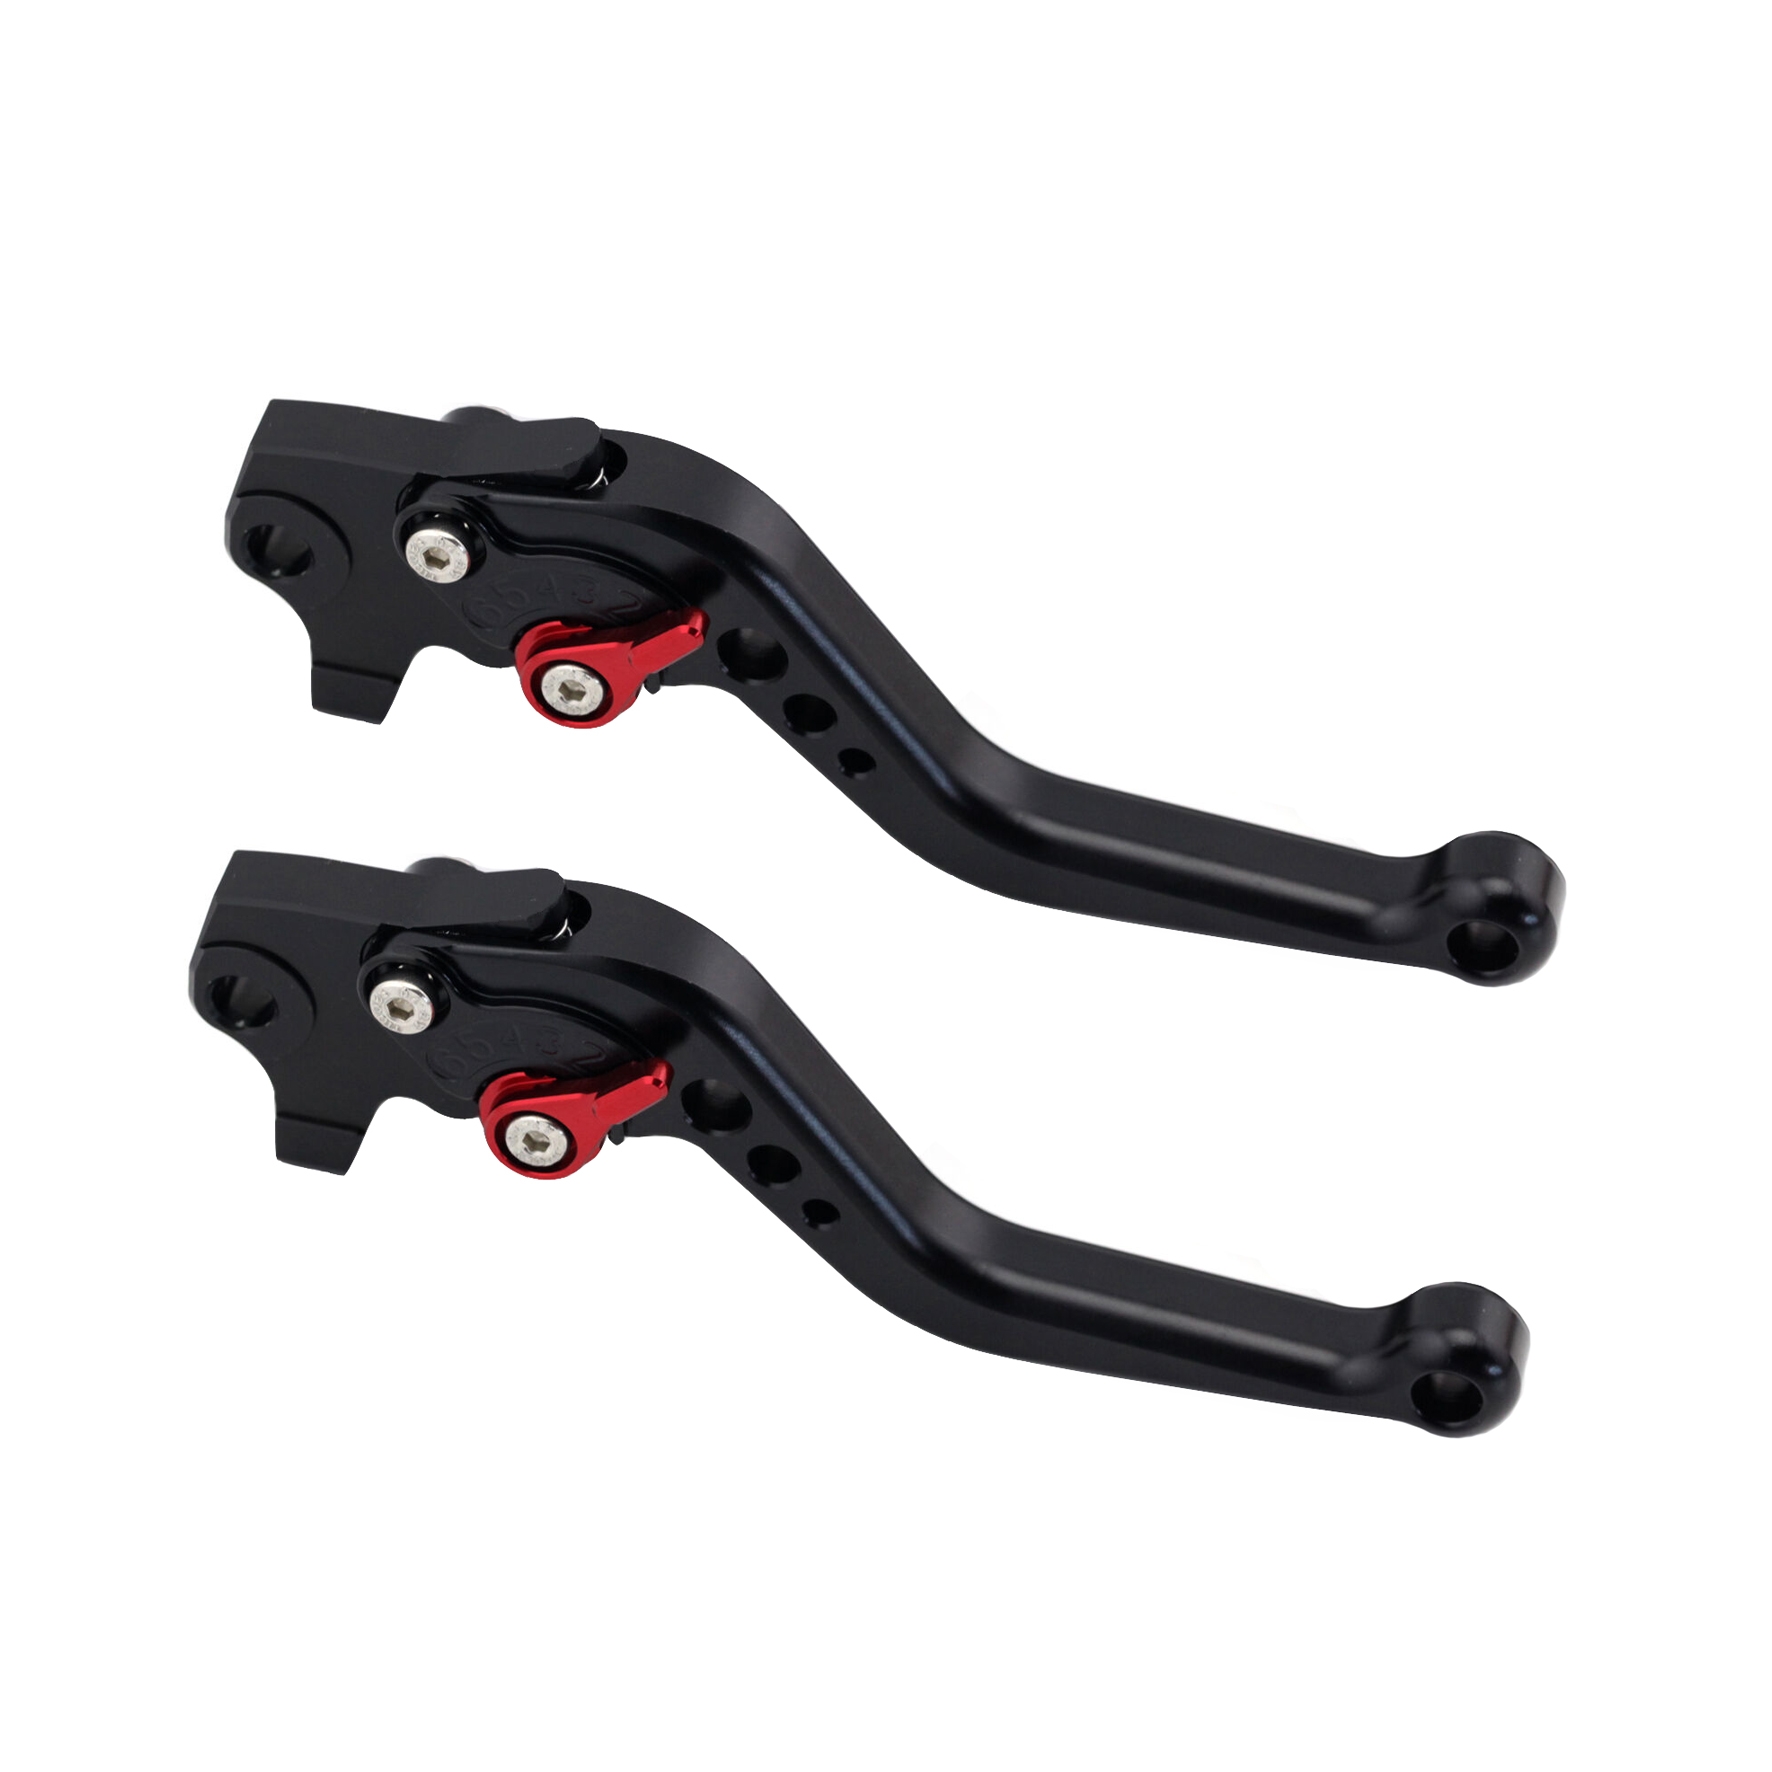 RR Racing adjustable levers for Yamaha NMAX 125 / 155 black-red